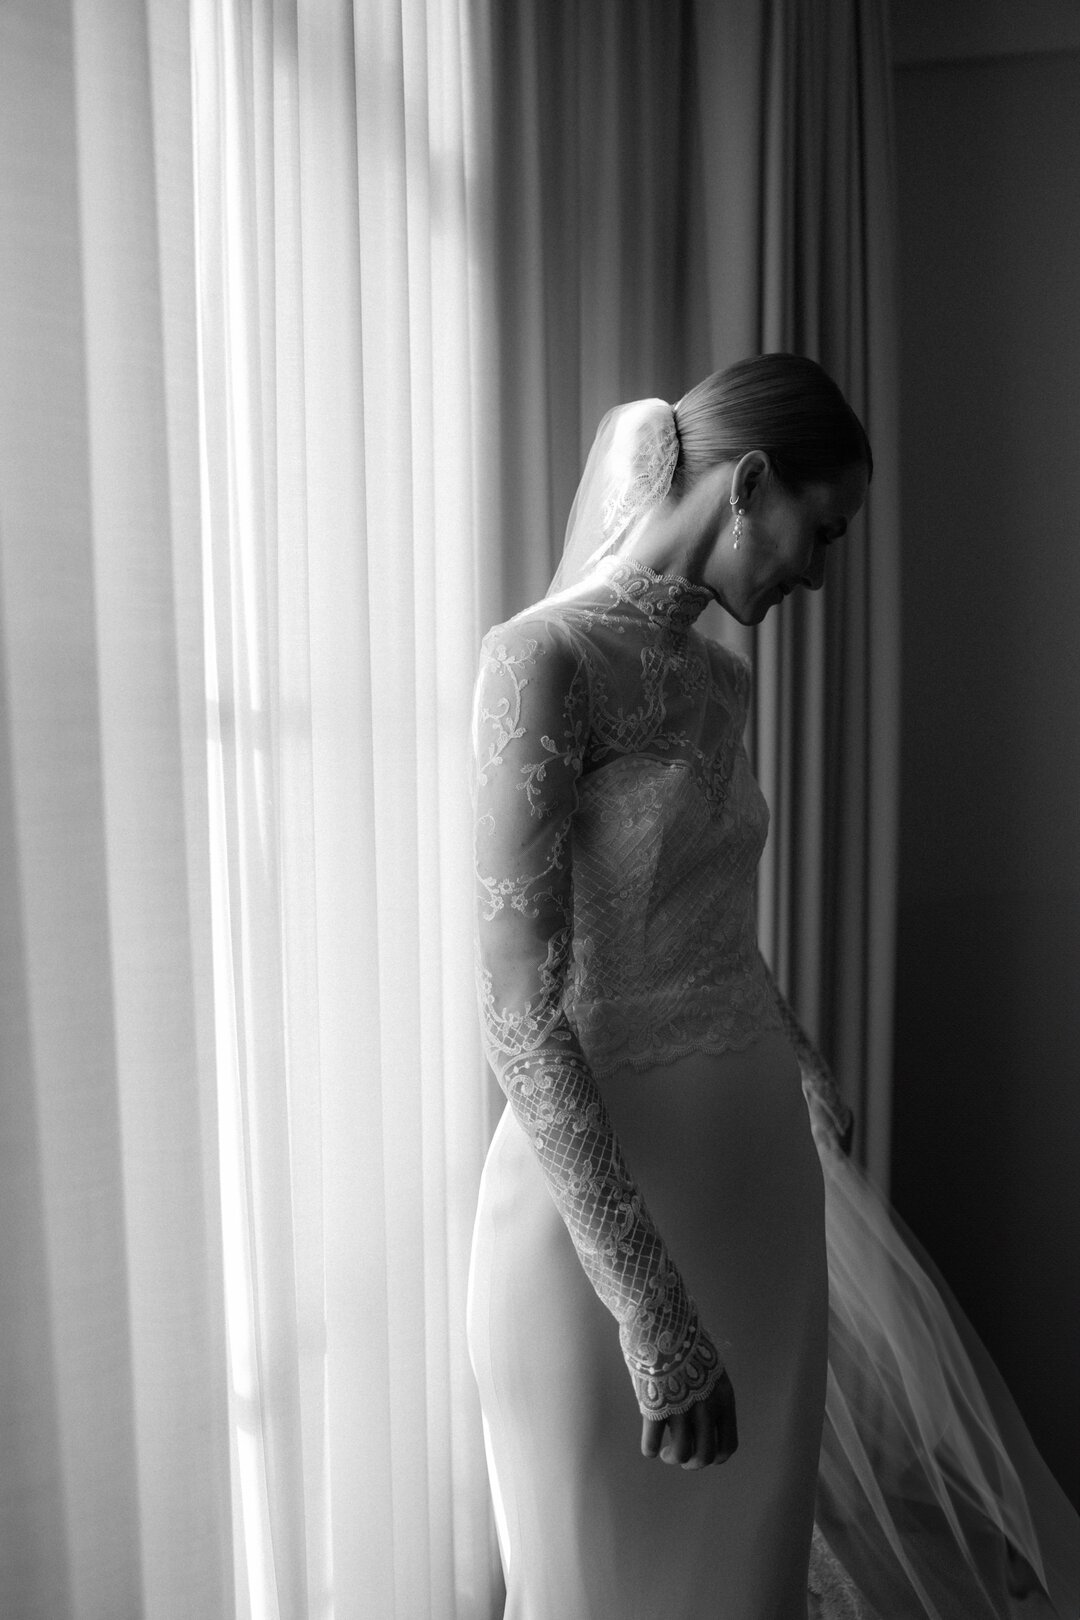 A THOUGHTFUL MOMENT // of my beautiful Danish bride AM in her suite at Claridge's, moments before departing for her wedding ceremony at the iconic Grosvenor Chapel. Captured so beautifully by the amazing @rebeccareesphotography.
.
Design and planning